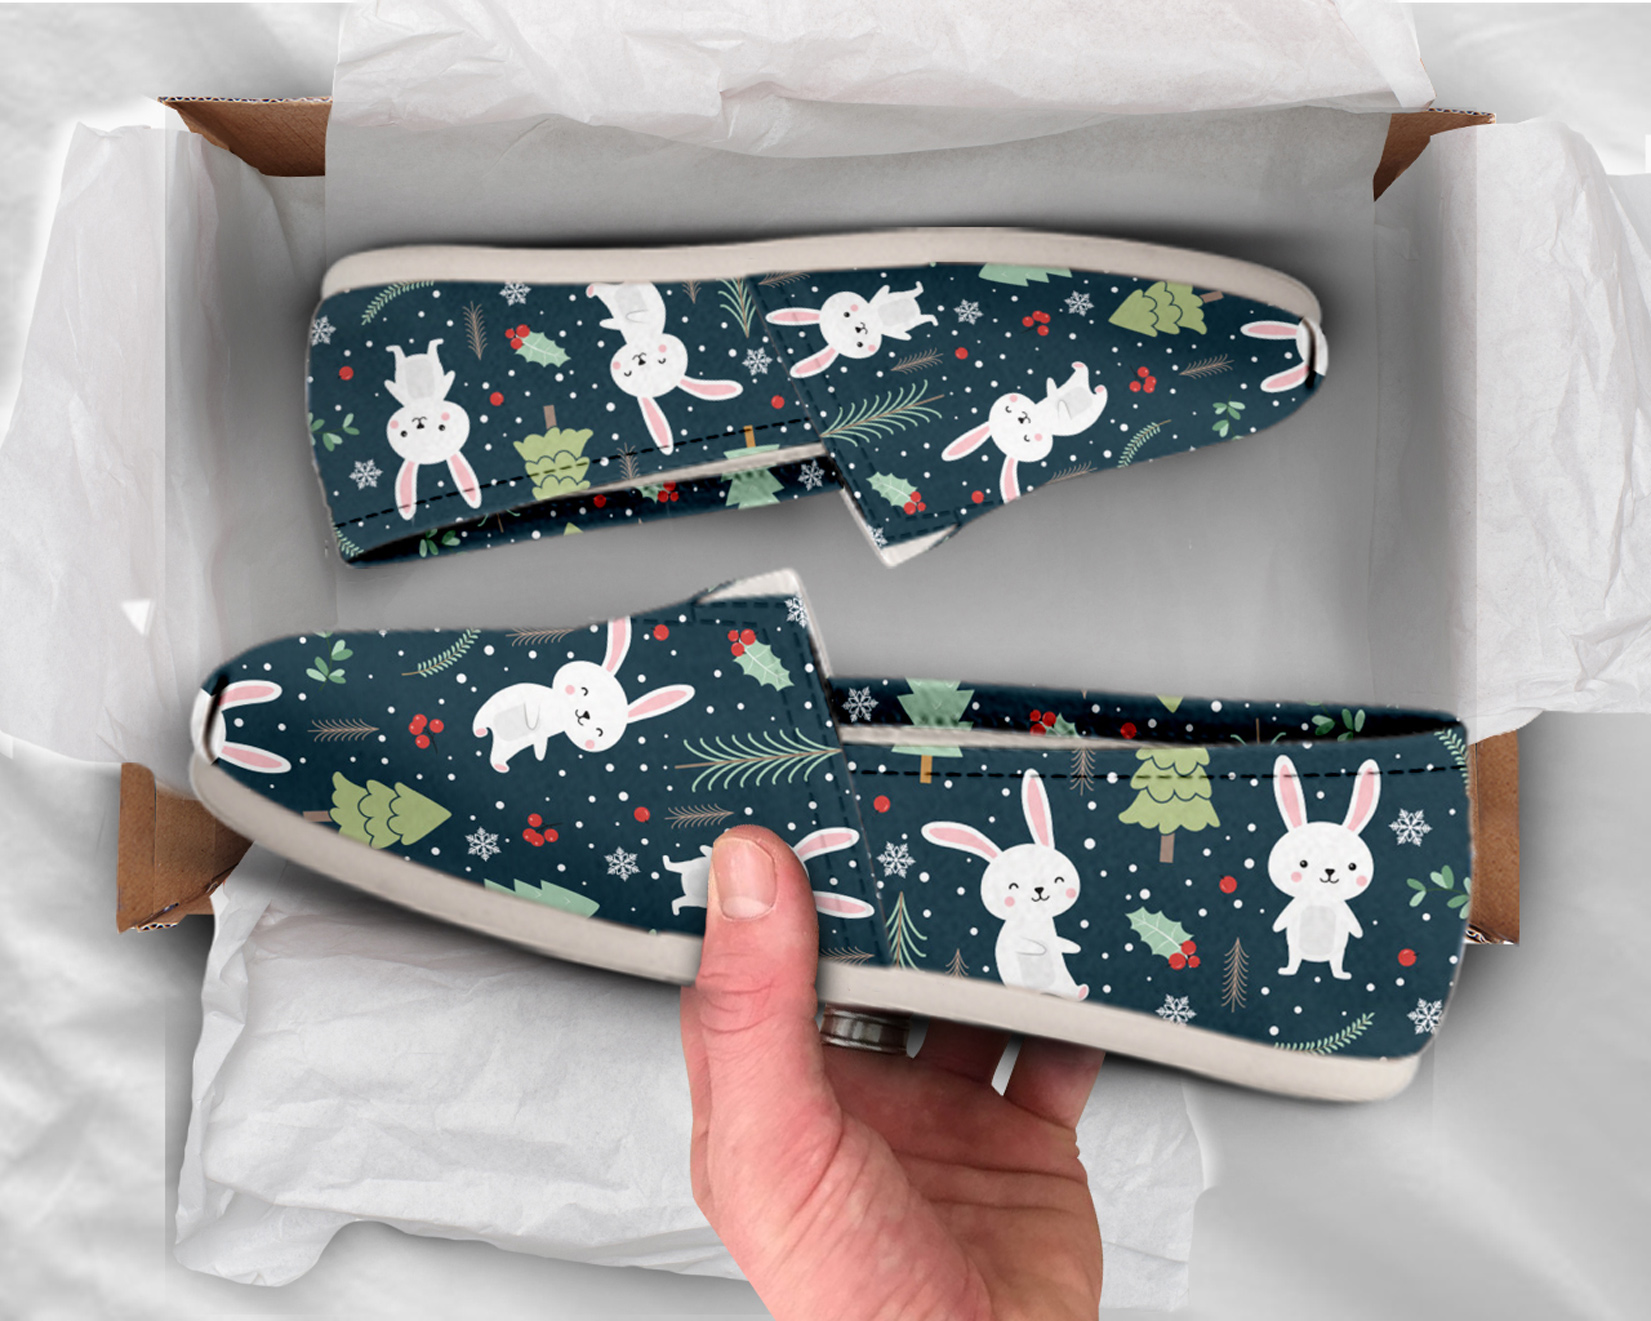 White Rabbit Shoes | Custom Canvas Sneakers For Kids & Adults